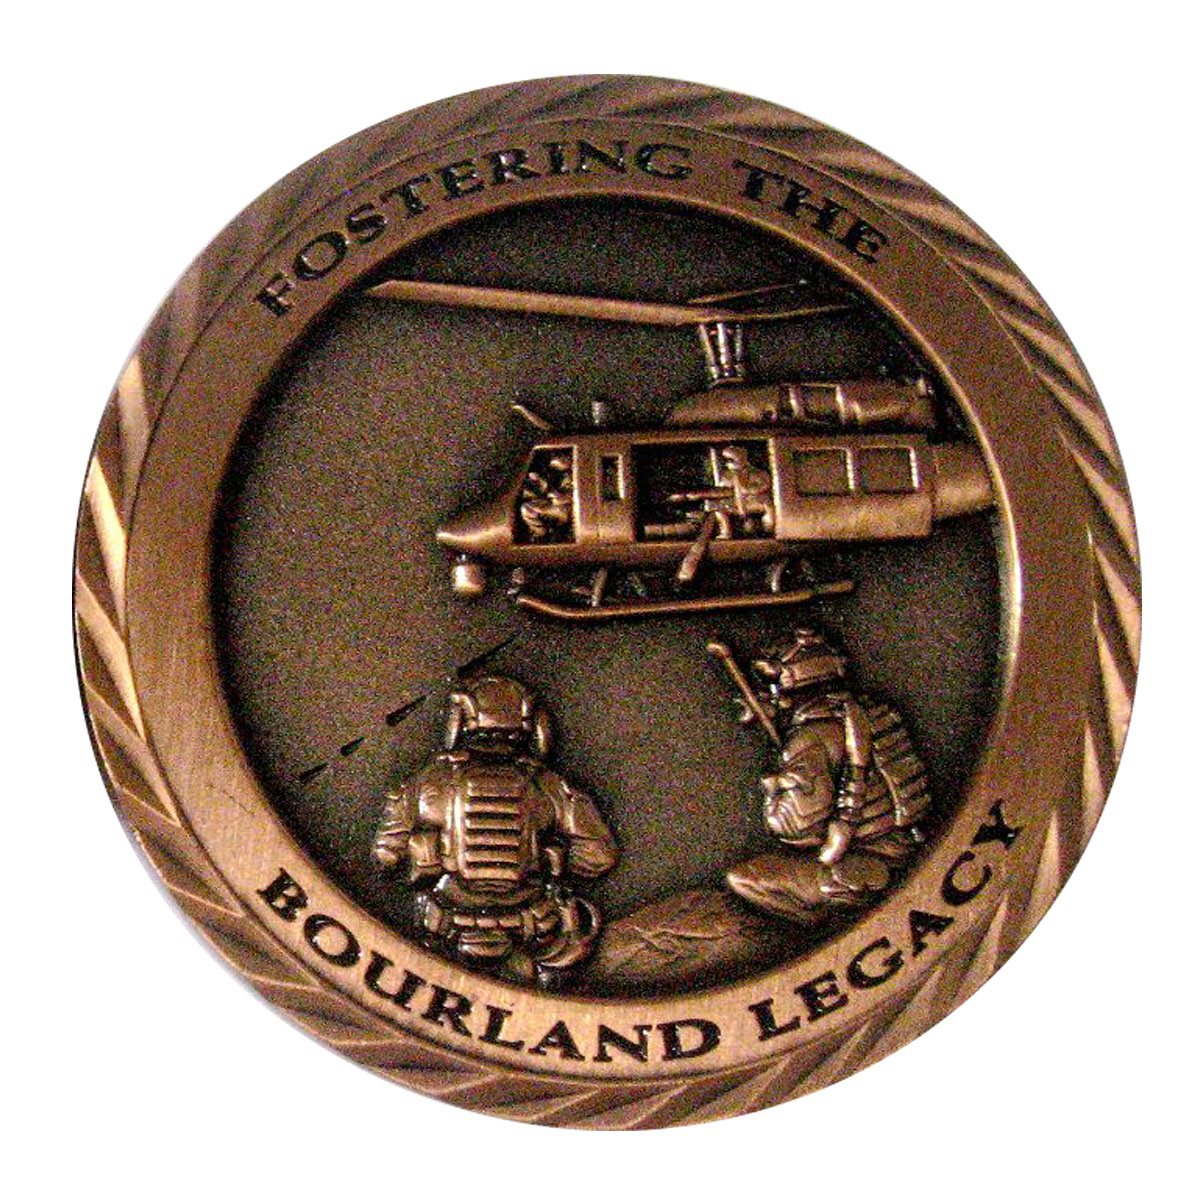 Postering The Bourland Legacy - Copper Challenge Coin